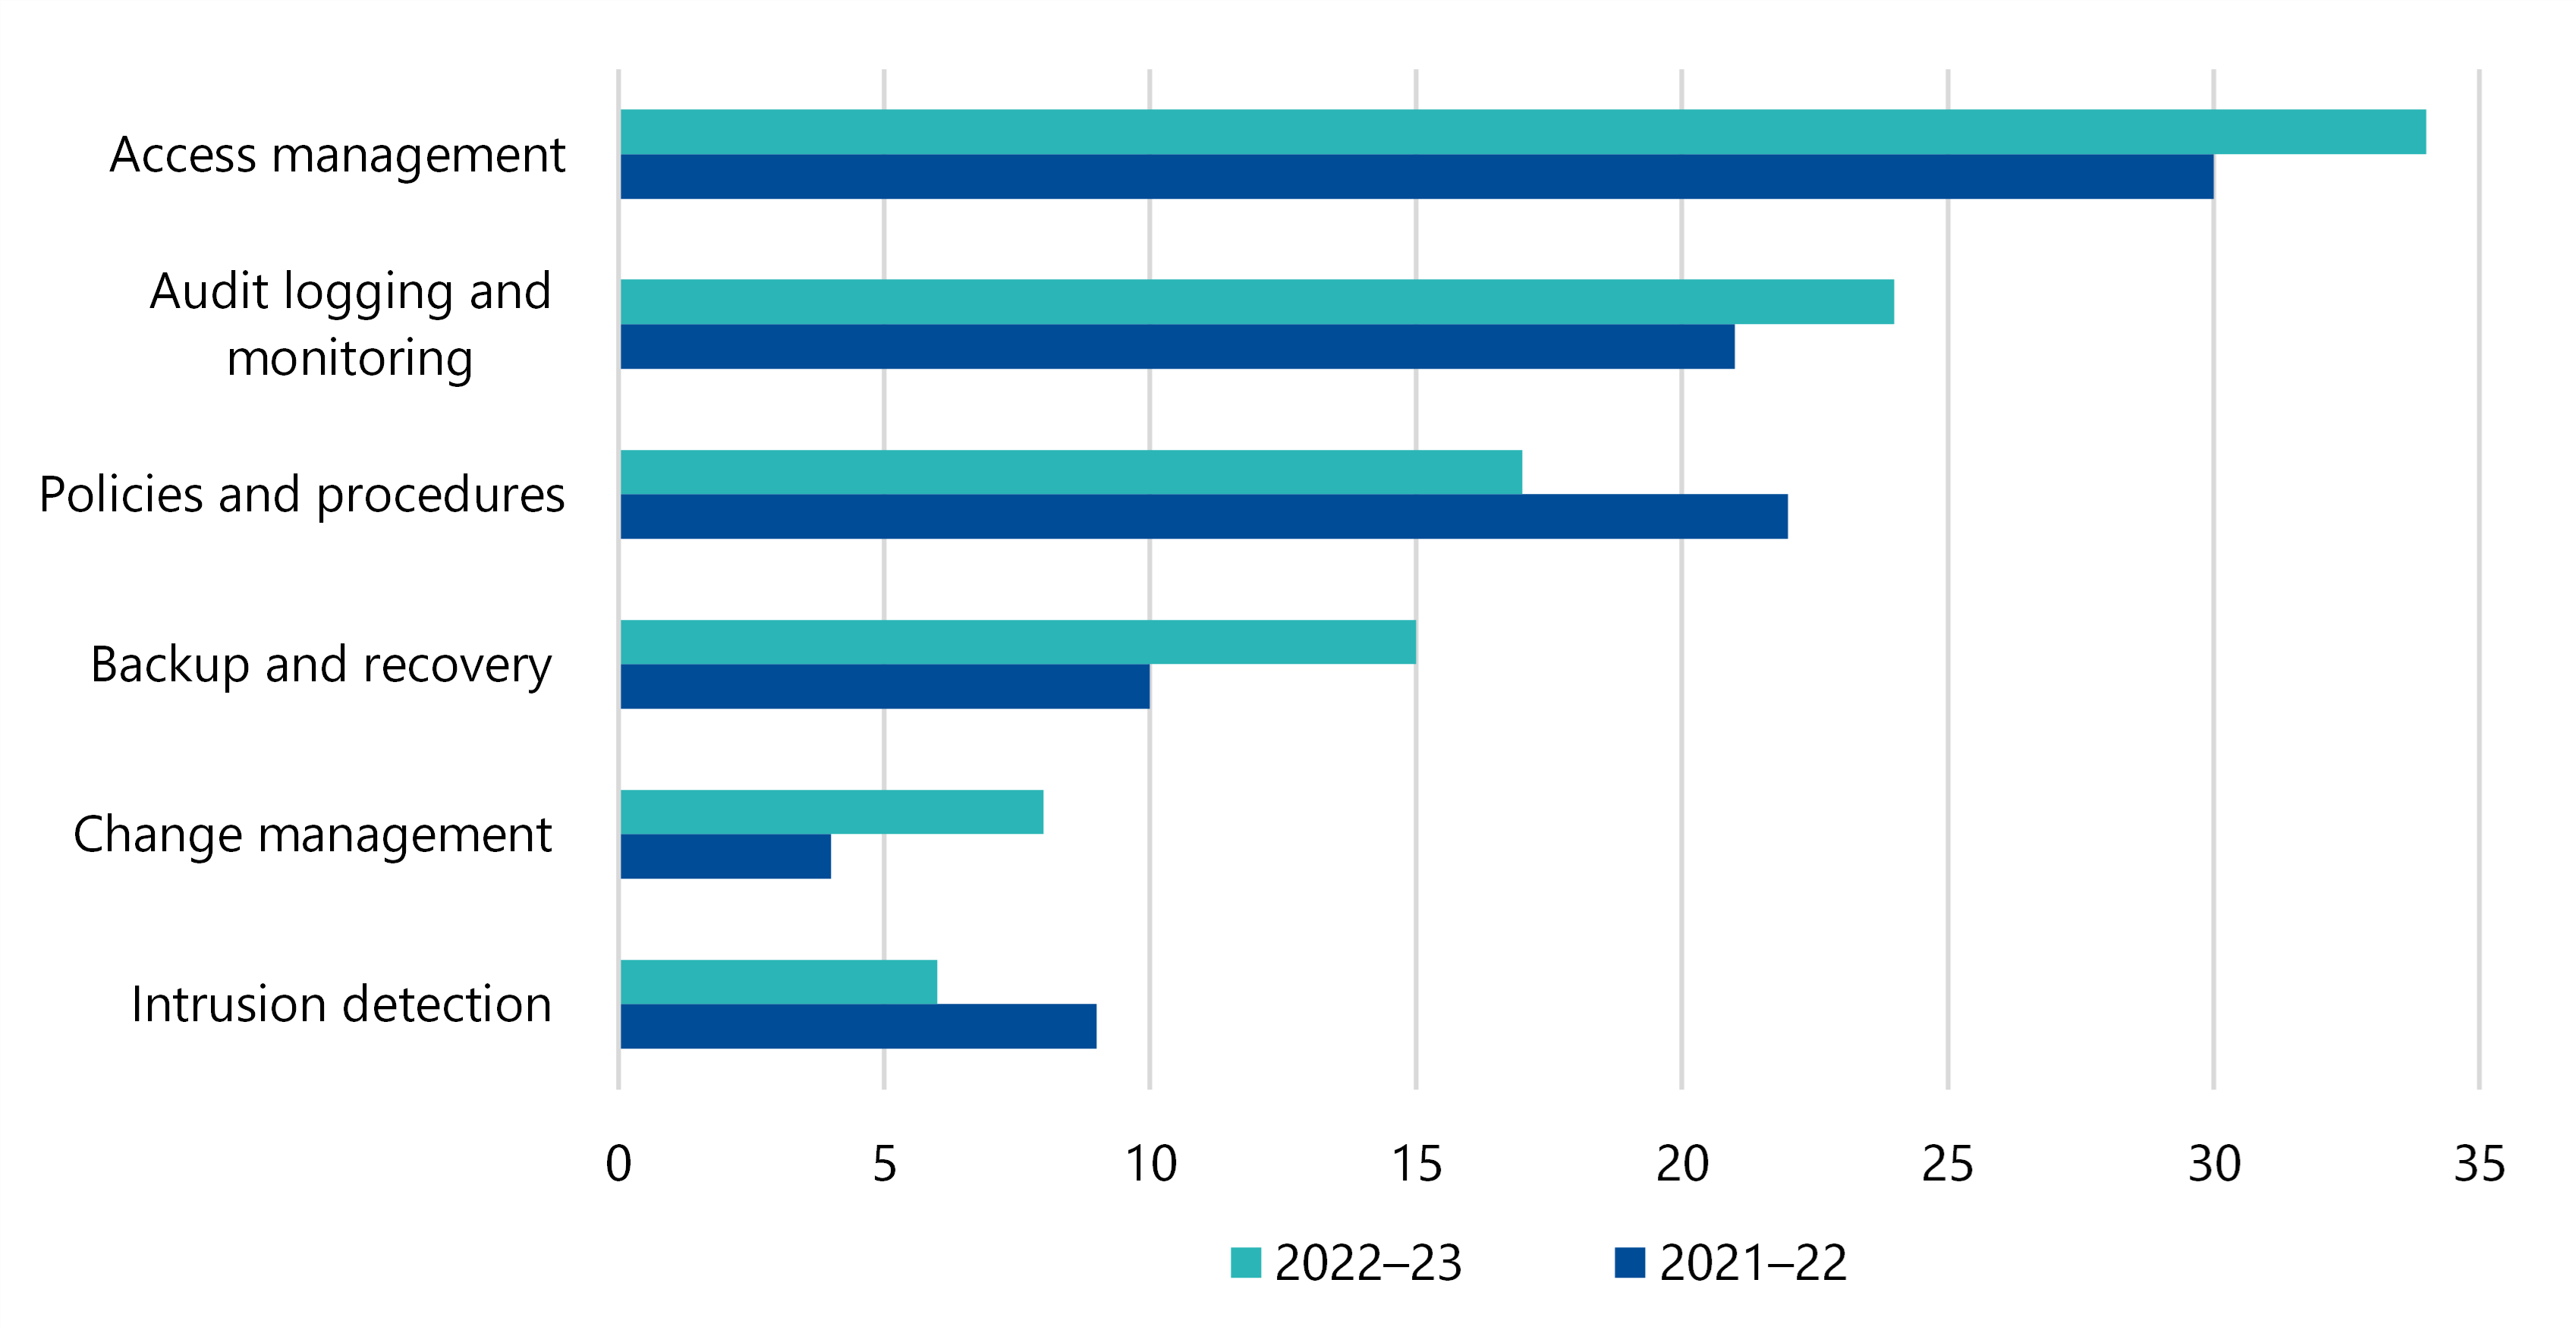 Figure 23 is a combo bar chart showing that, among unresolved IT weaknesses across all councils, there were 30 in access management in 2021–22 and 34 in 2022–23. There were 21 in audit logging and monitoring in 2021–22 and 24 in 2022–23. There were 22 in policies and procedures in 2021–22 and 17 in 2022–23. There were 10 in backup and recovery in 2021–22 and 15 in 2022–23. There were 4 in change management in 2021–22 and 8 in 2022–23. There were 9 in intrusion detection in 2021–22 and 6 in 2022–23.